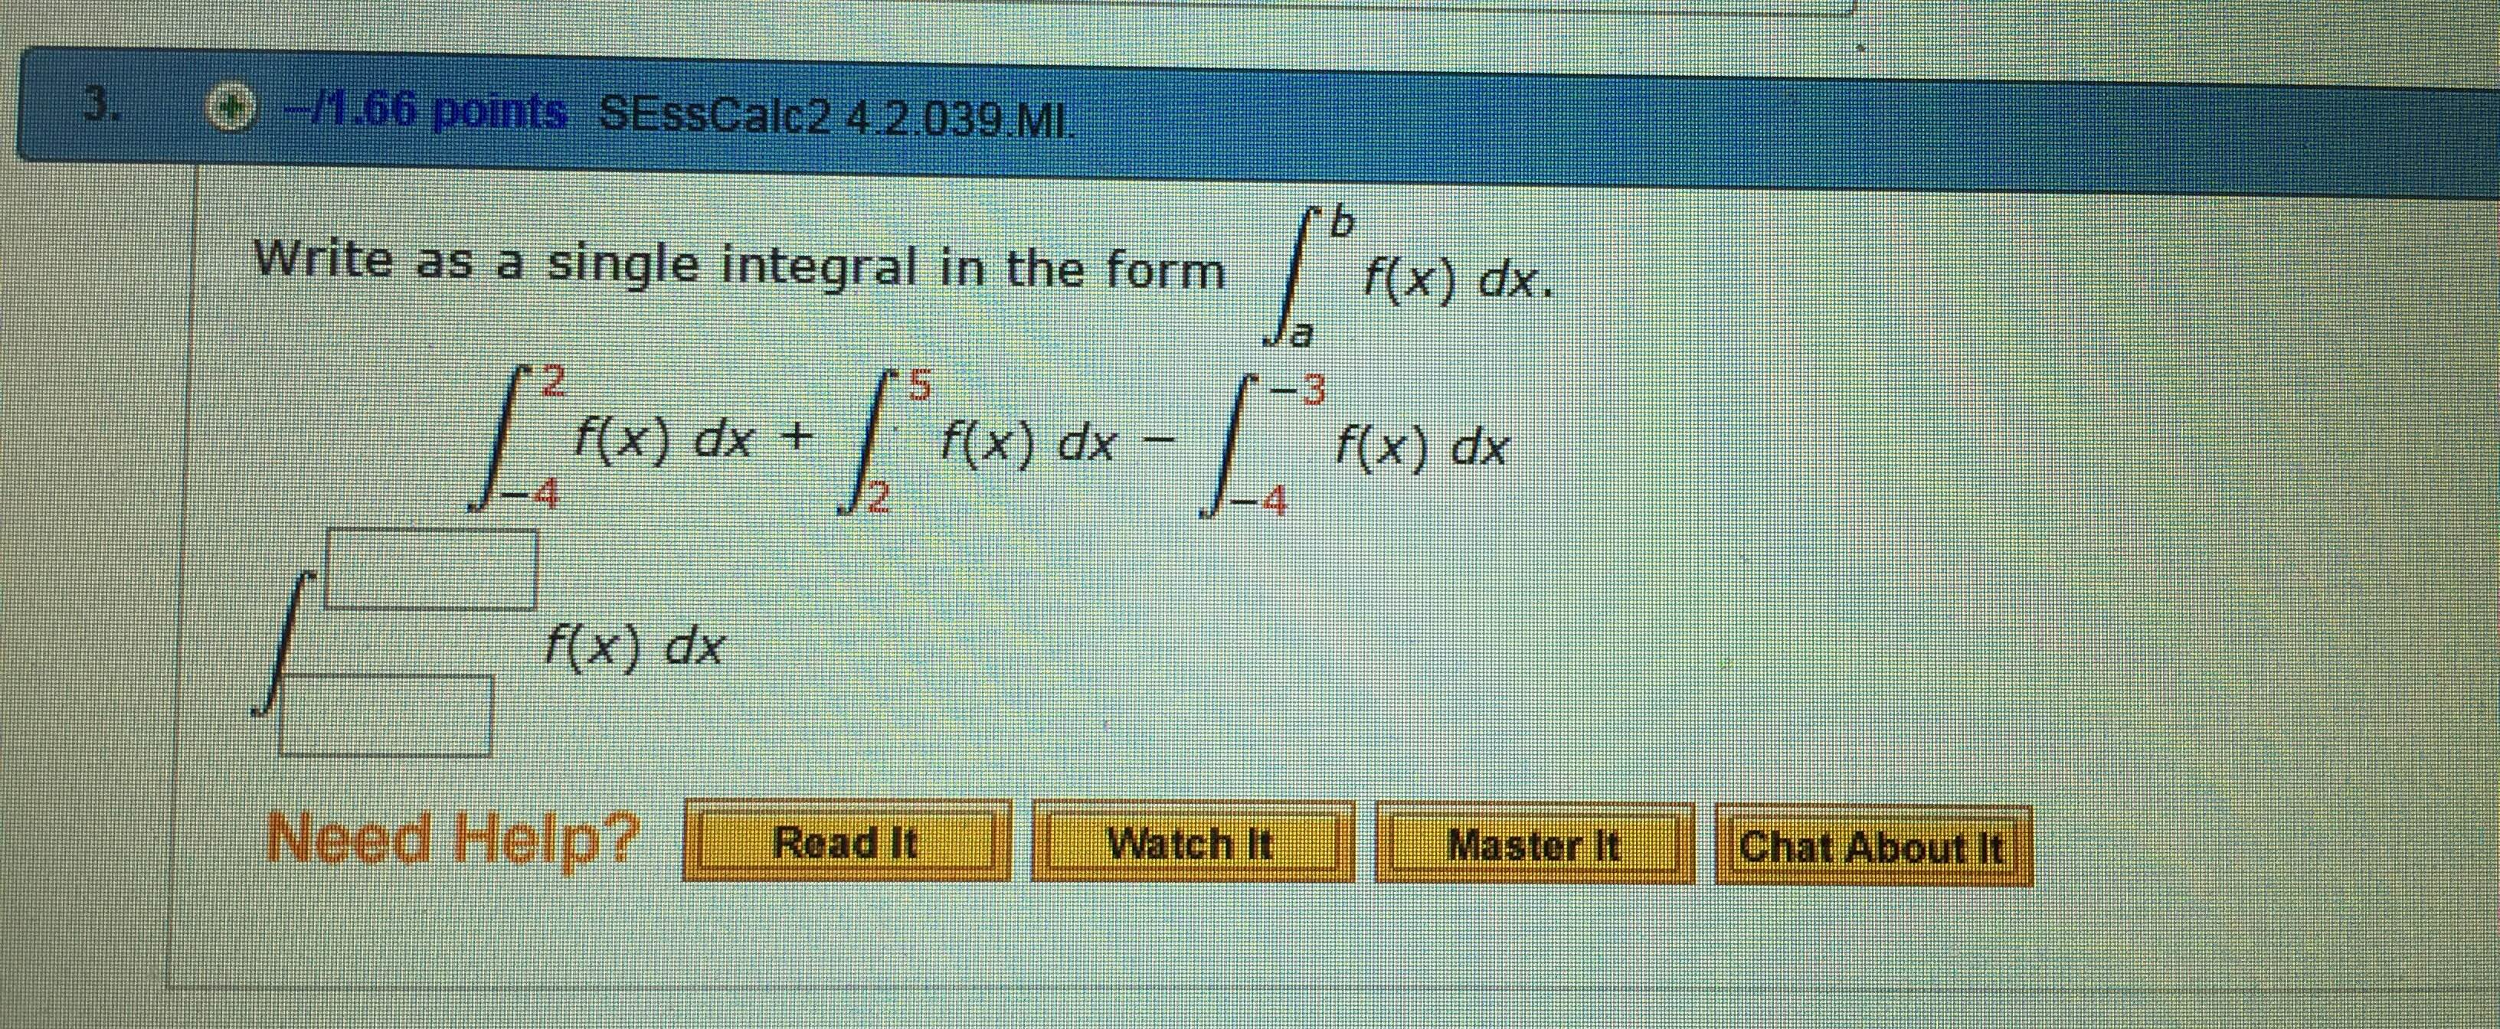 write-as-a-single-integral-in-the-form-f-x-dx-lrax-solvedlib